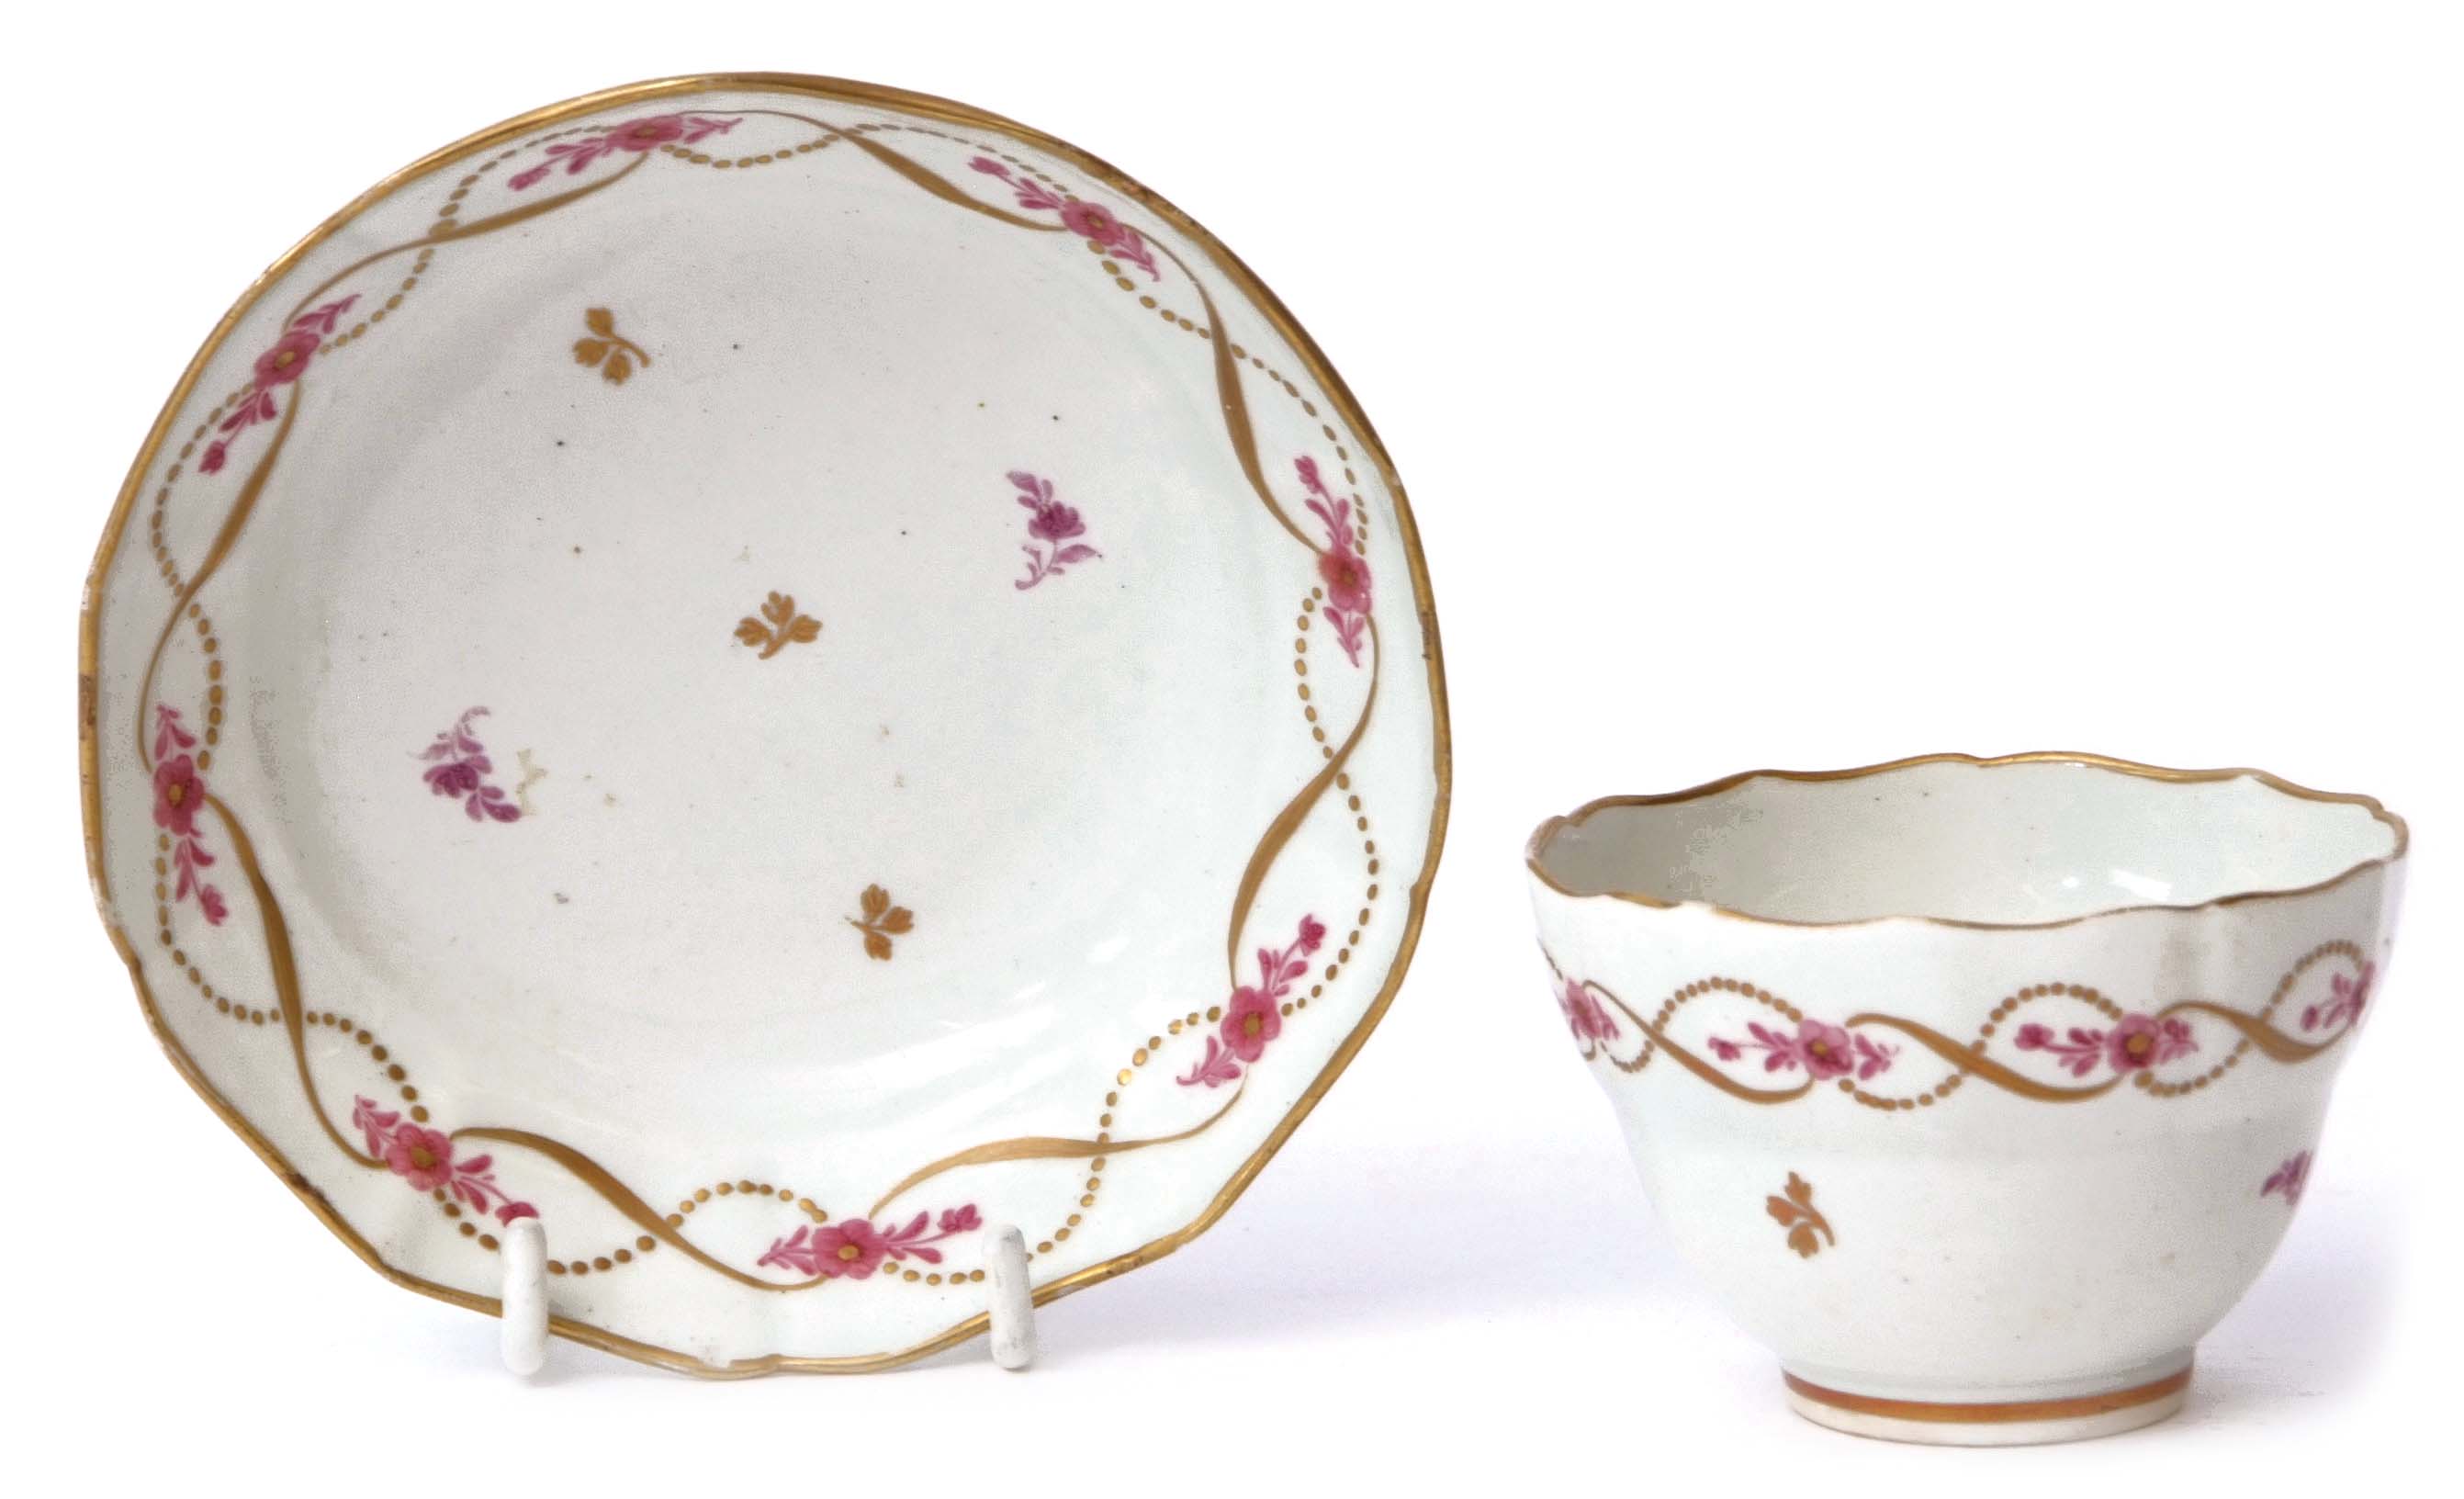 Lowestoft porcelain ogee shaped tea bowl and saucer circa 1790, with gilt and puce design, the